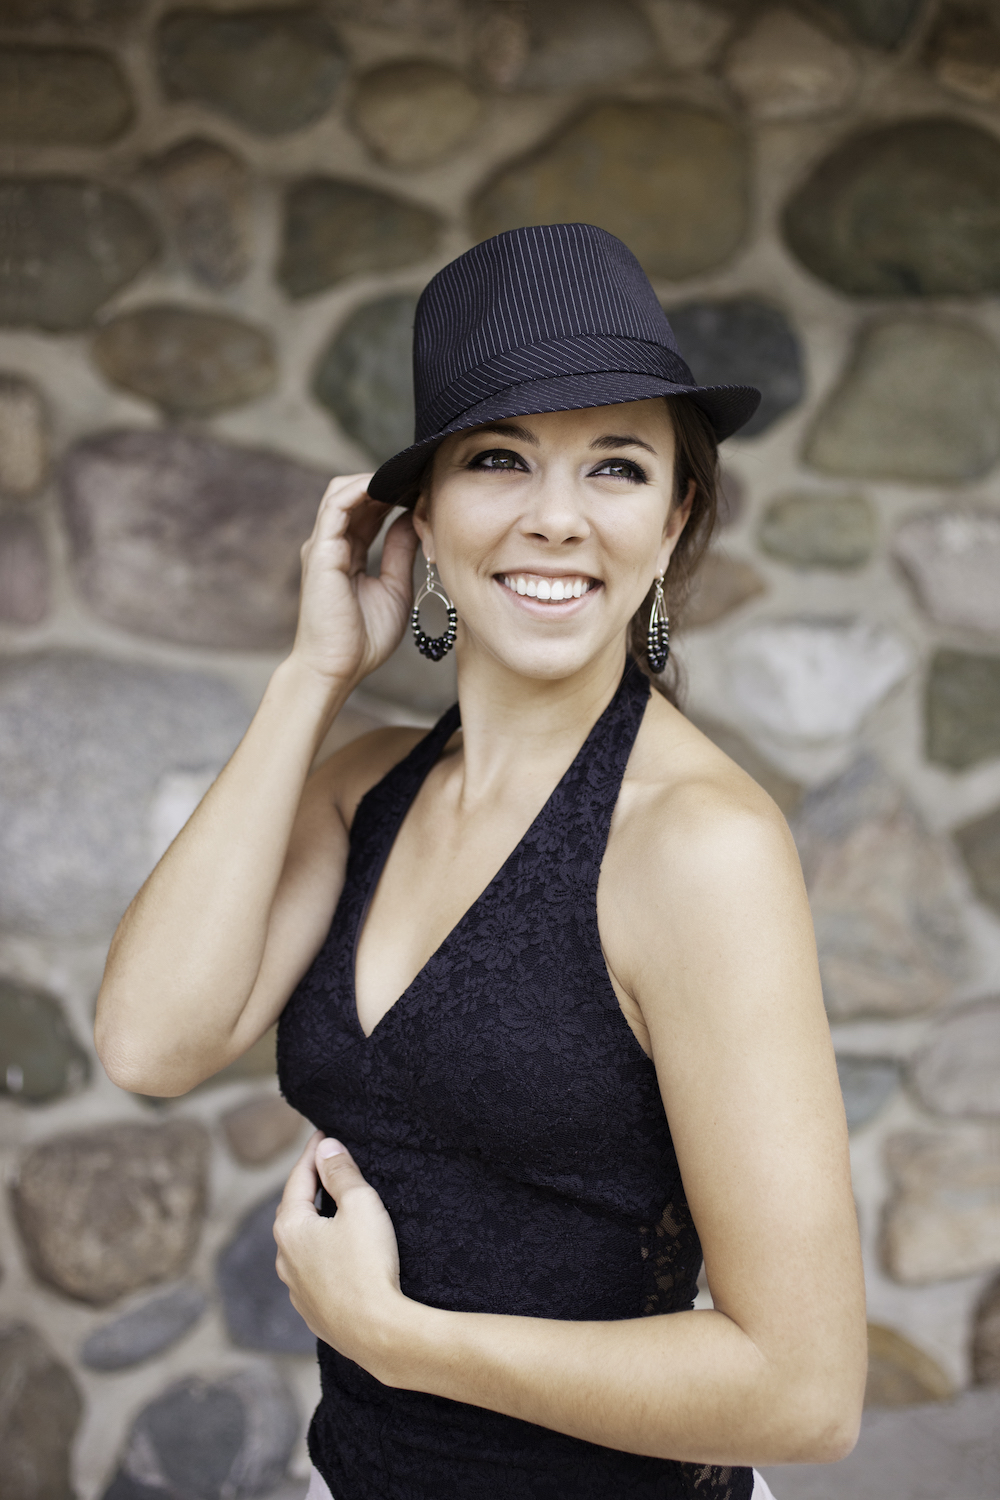 A woman wearing a black halter-neck top and a black hat, smiling